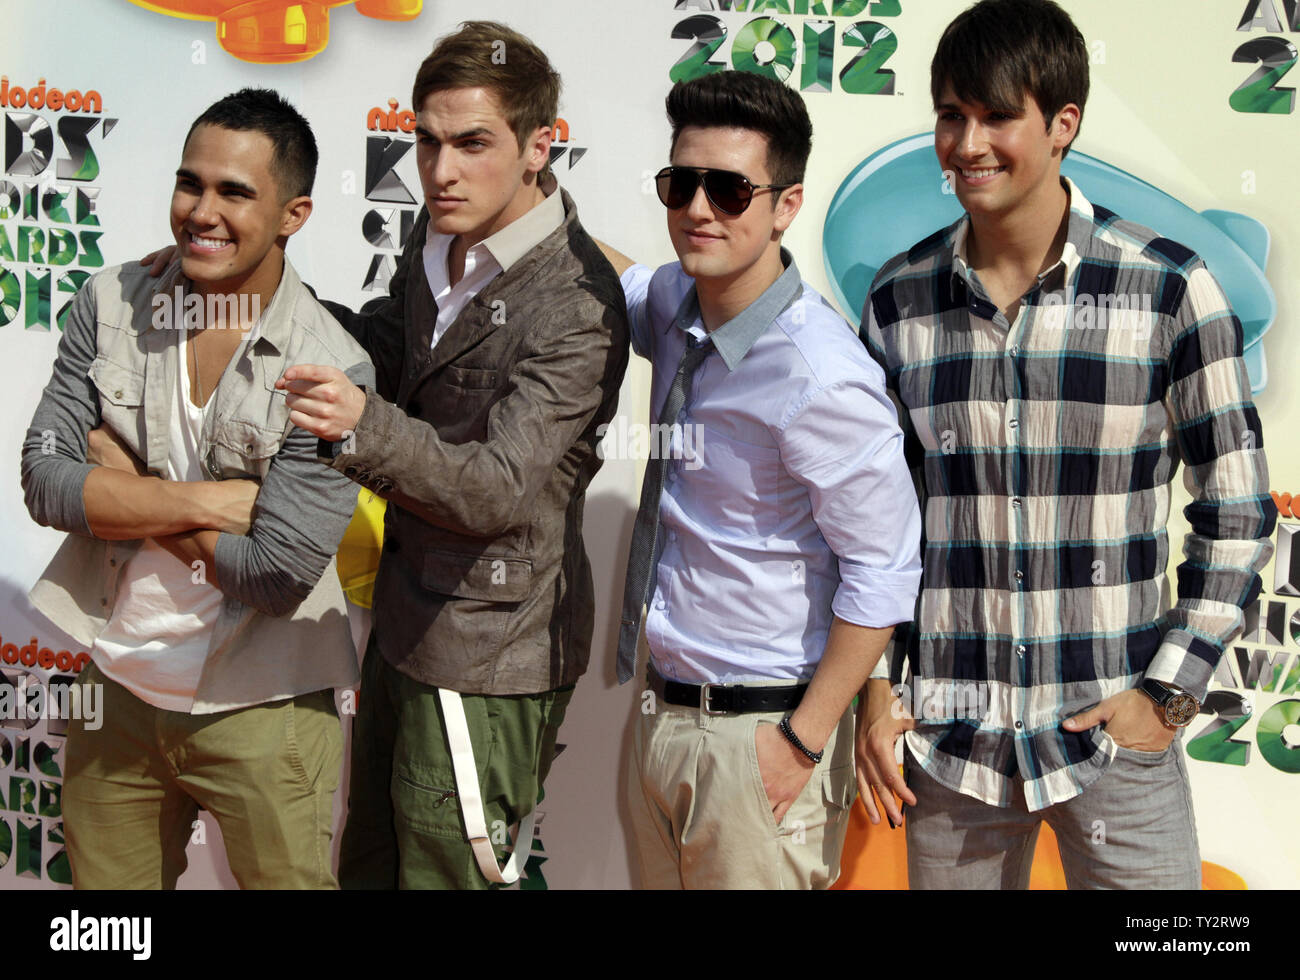 Actors Carlos Pena, Logan Henderson, Kendall Schmidt and James Maslow of Big Time Rush arrives for Nickelodeon's Kids' Choice Awards at USC's Galen Center in Los Angeles on March 31, 2012.  UPI/Jonathan Alcorn Stock Photo